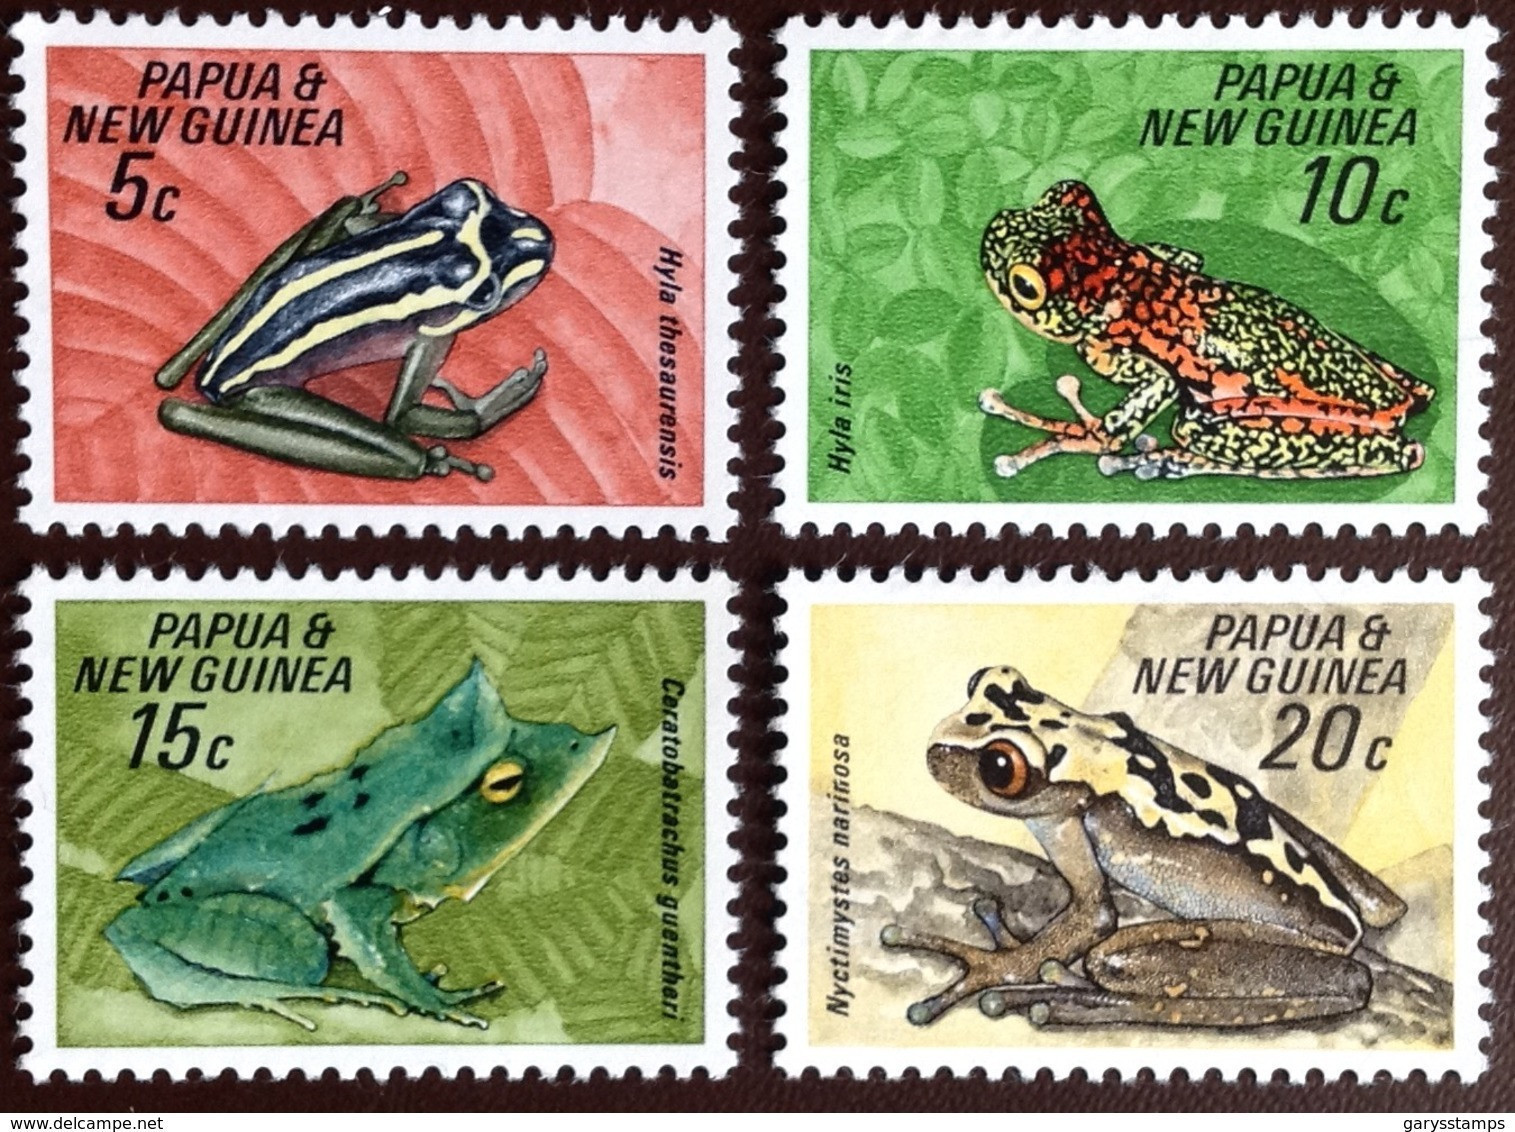 Papua New Guinea 1968 Reptiles Frogs MNH - Grenouilles